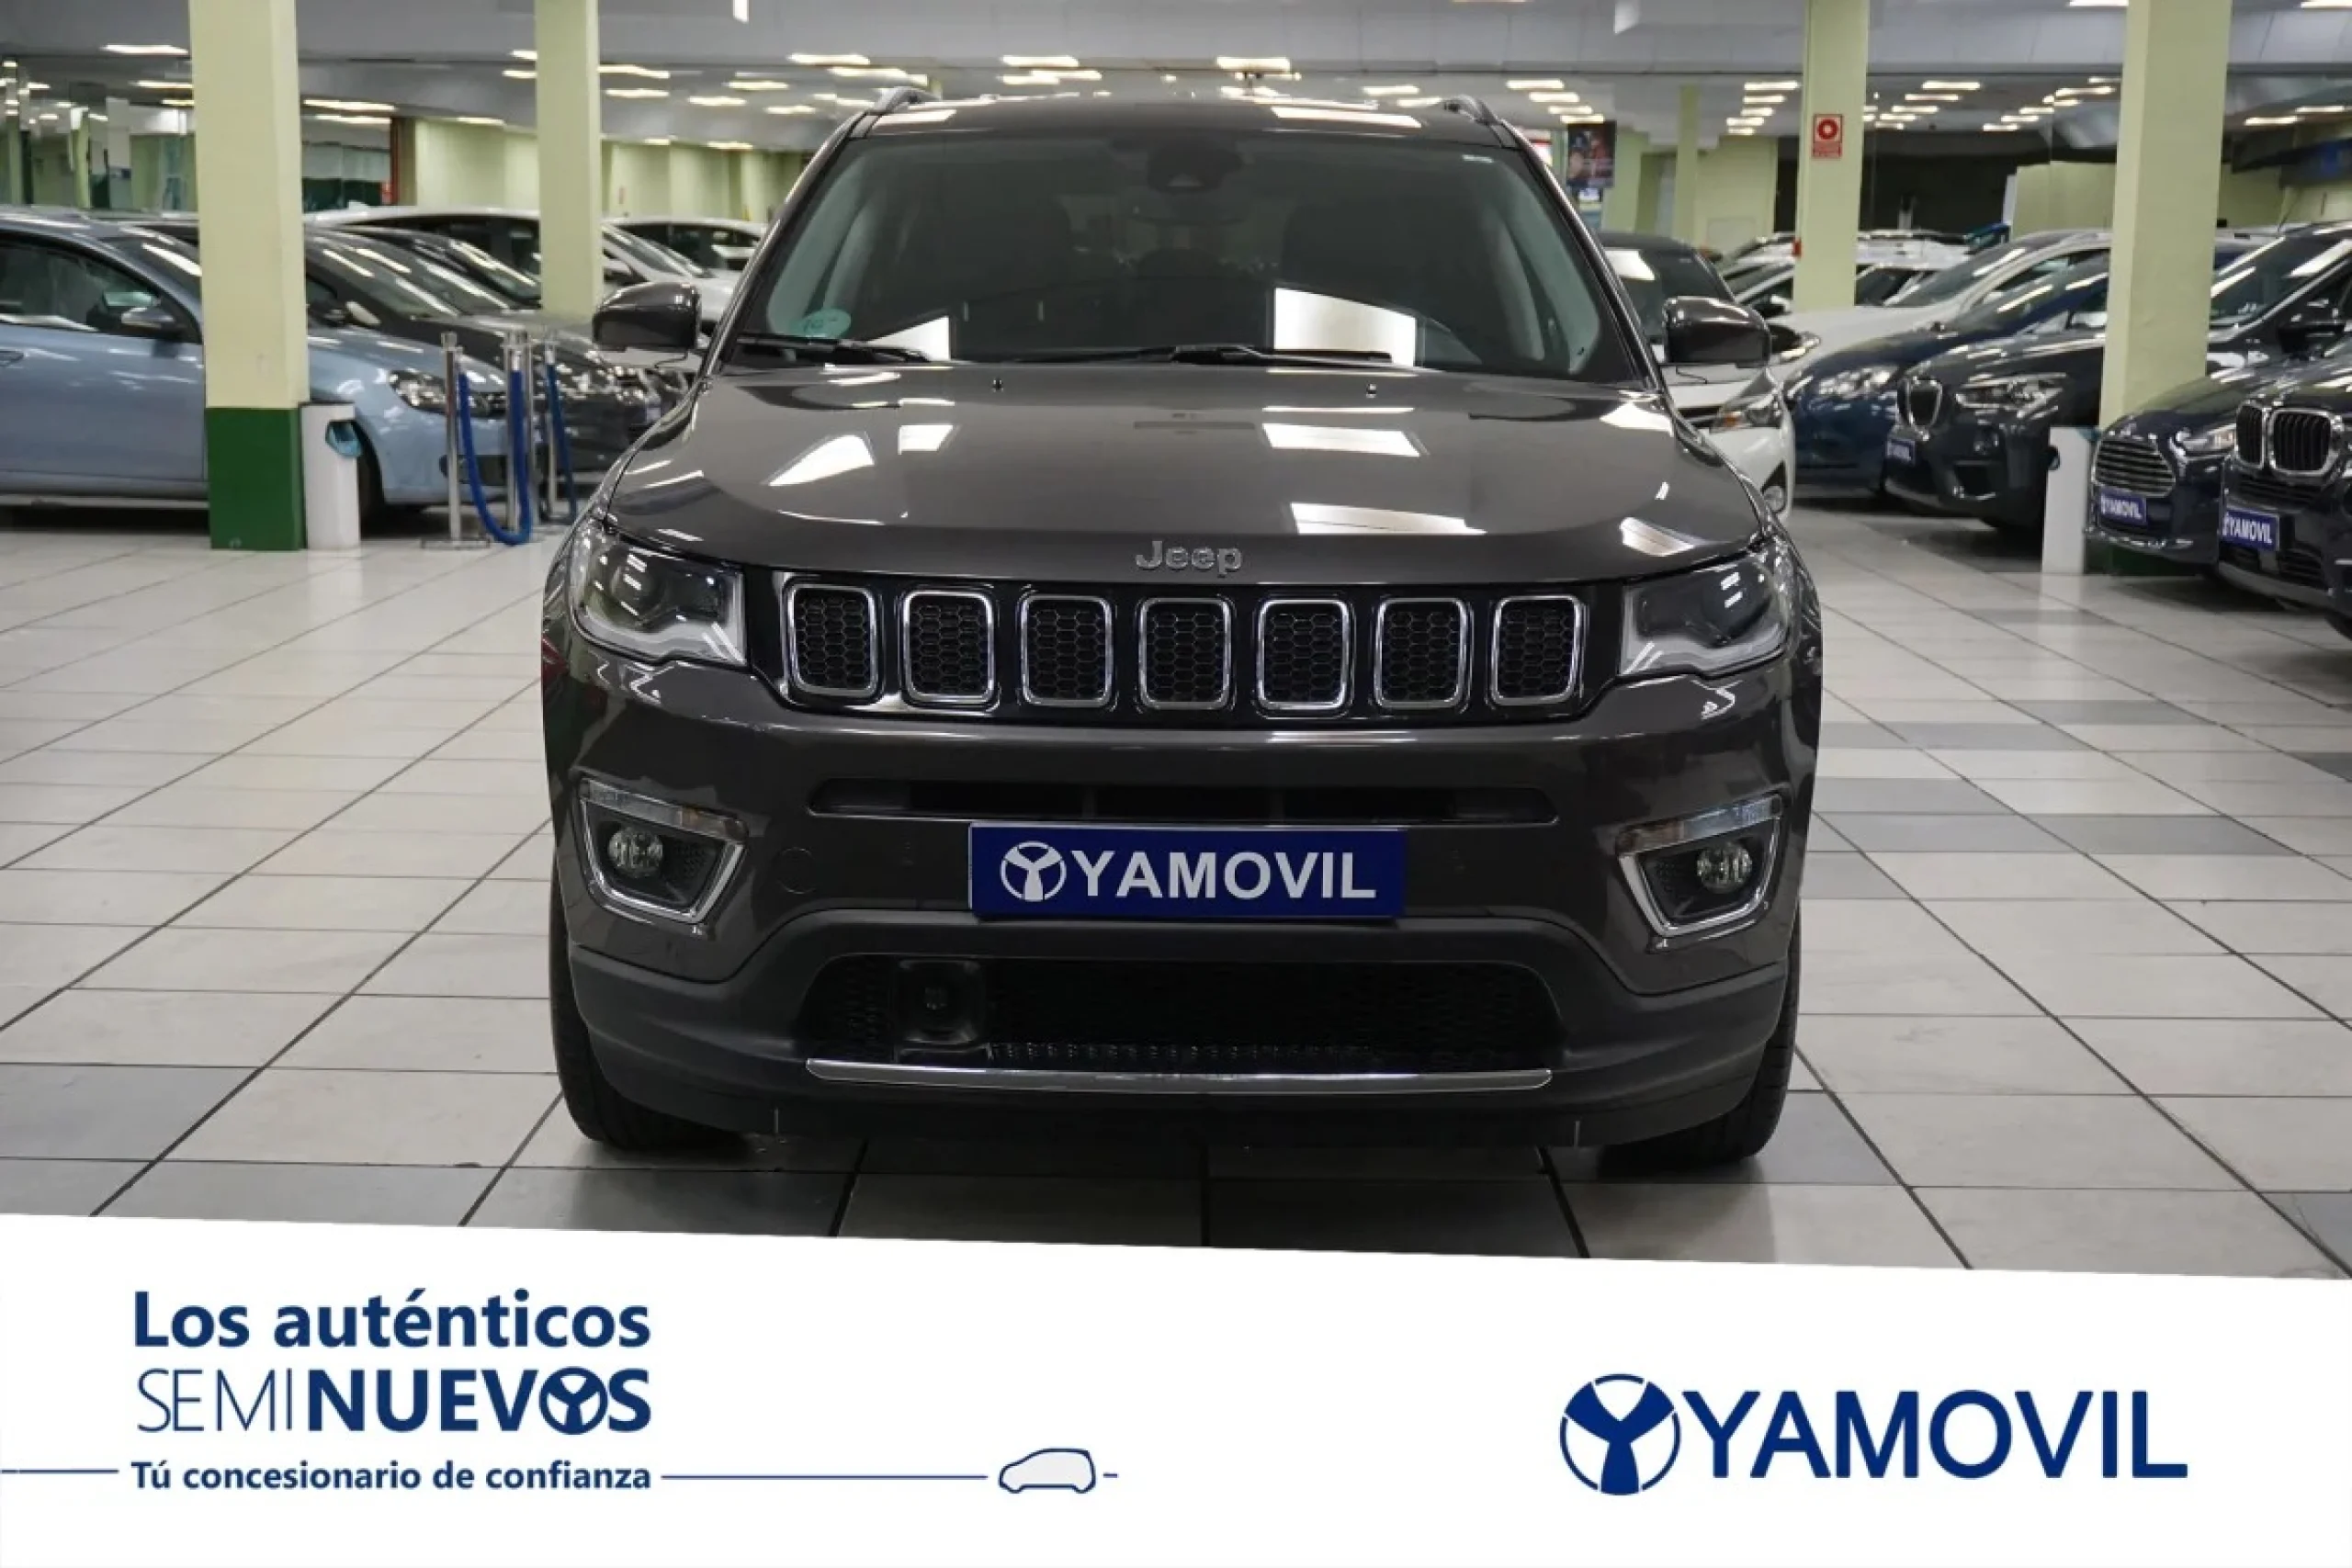 Jeep Compass 1.4 Multiair Limited 4x4 AD Auto 125 kW (170 CV) - Foto 2